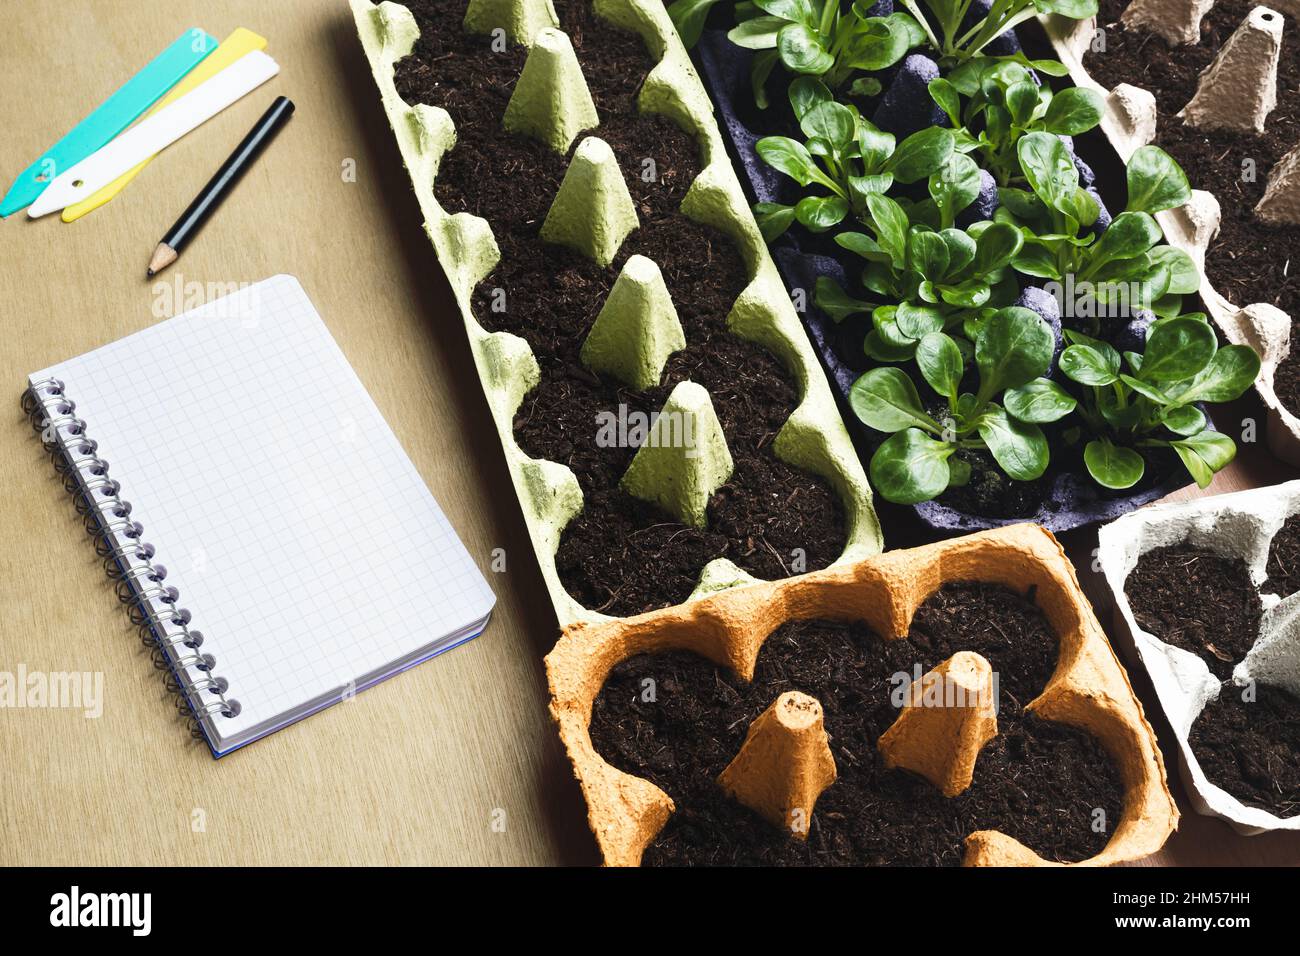 Reused eggs boxes for seeds germinating and a notebook on the table, sustainable home gardening, top view Stock Photo